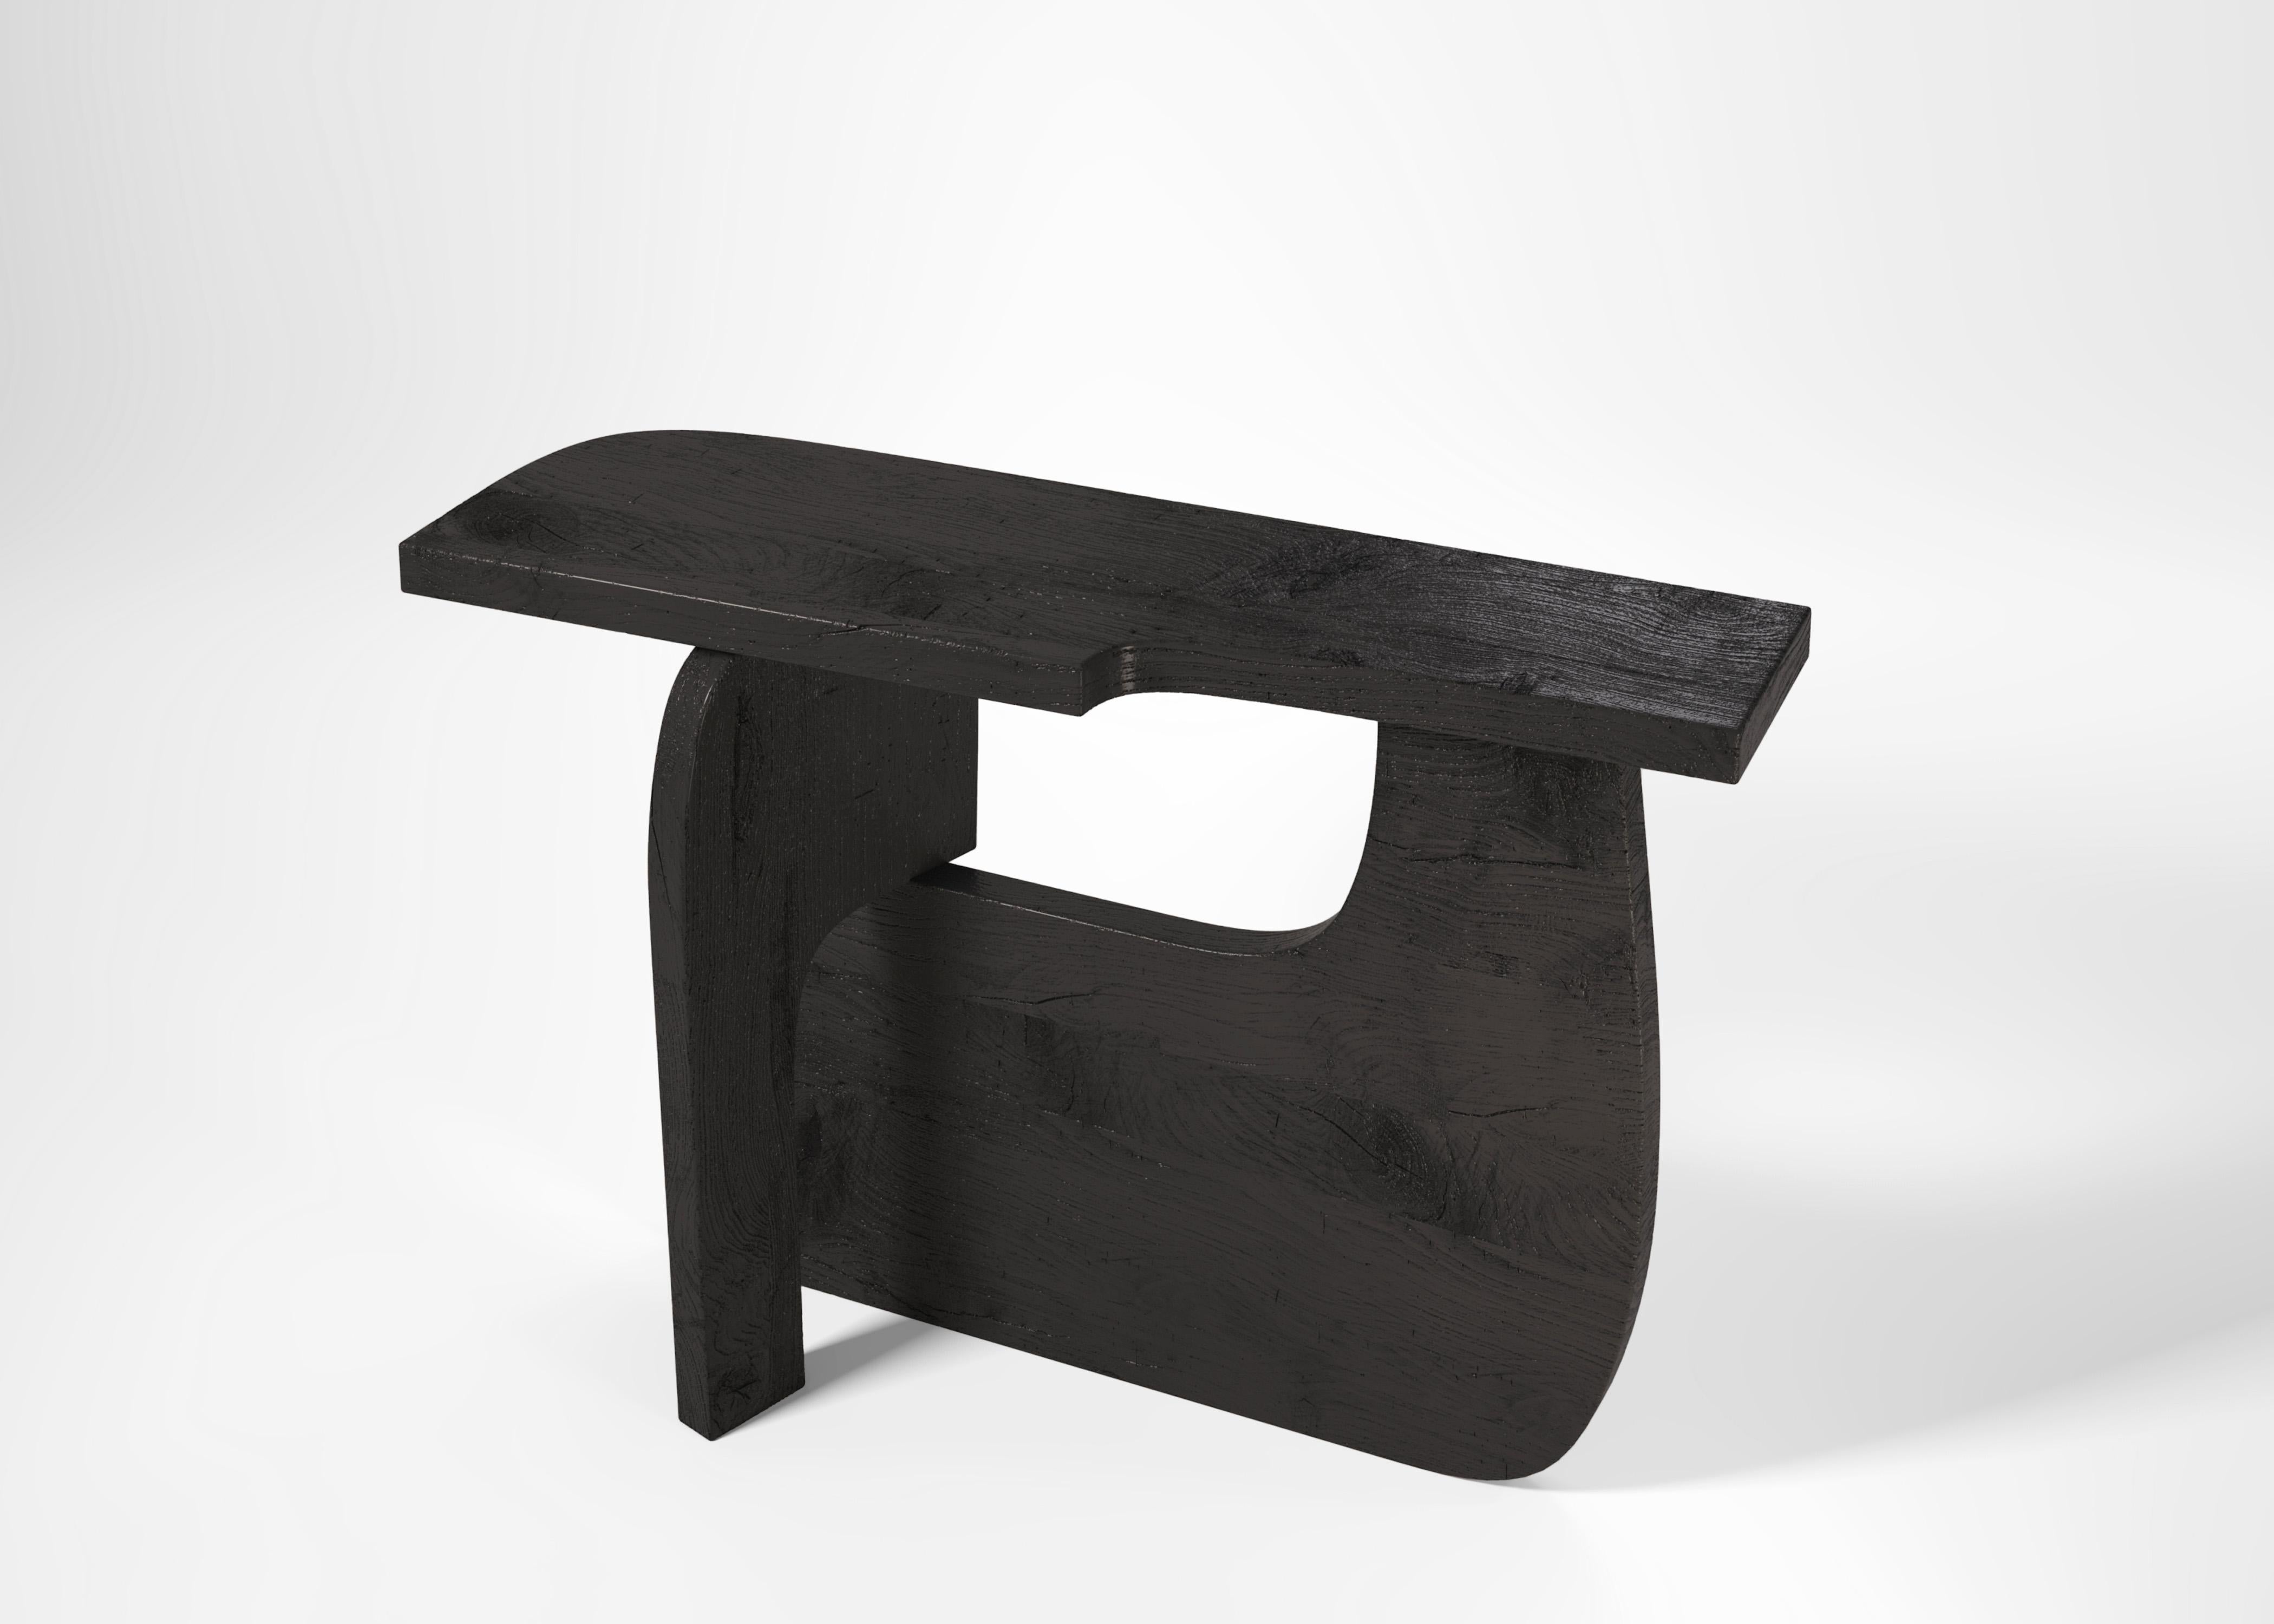 Reef console in charred wood by Edizione Limitata.
Limited edition of 150 pieces. Signed and numbered.
Designers: Simone Fanciullacci.
Dimensions: H 90 × W 40 × L 130 cm.
Materials: Charred wood.

Edizione Limitata, that is to say “Limited